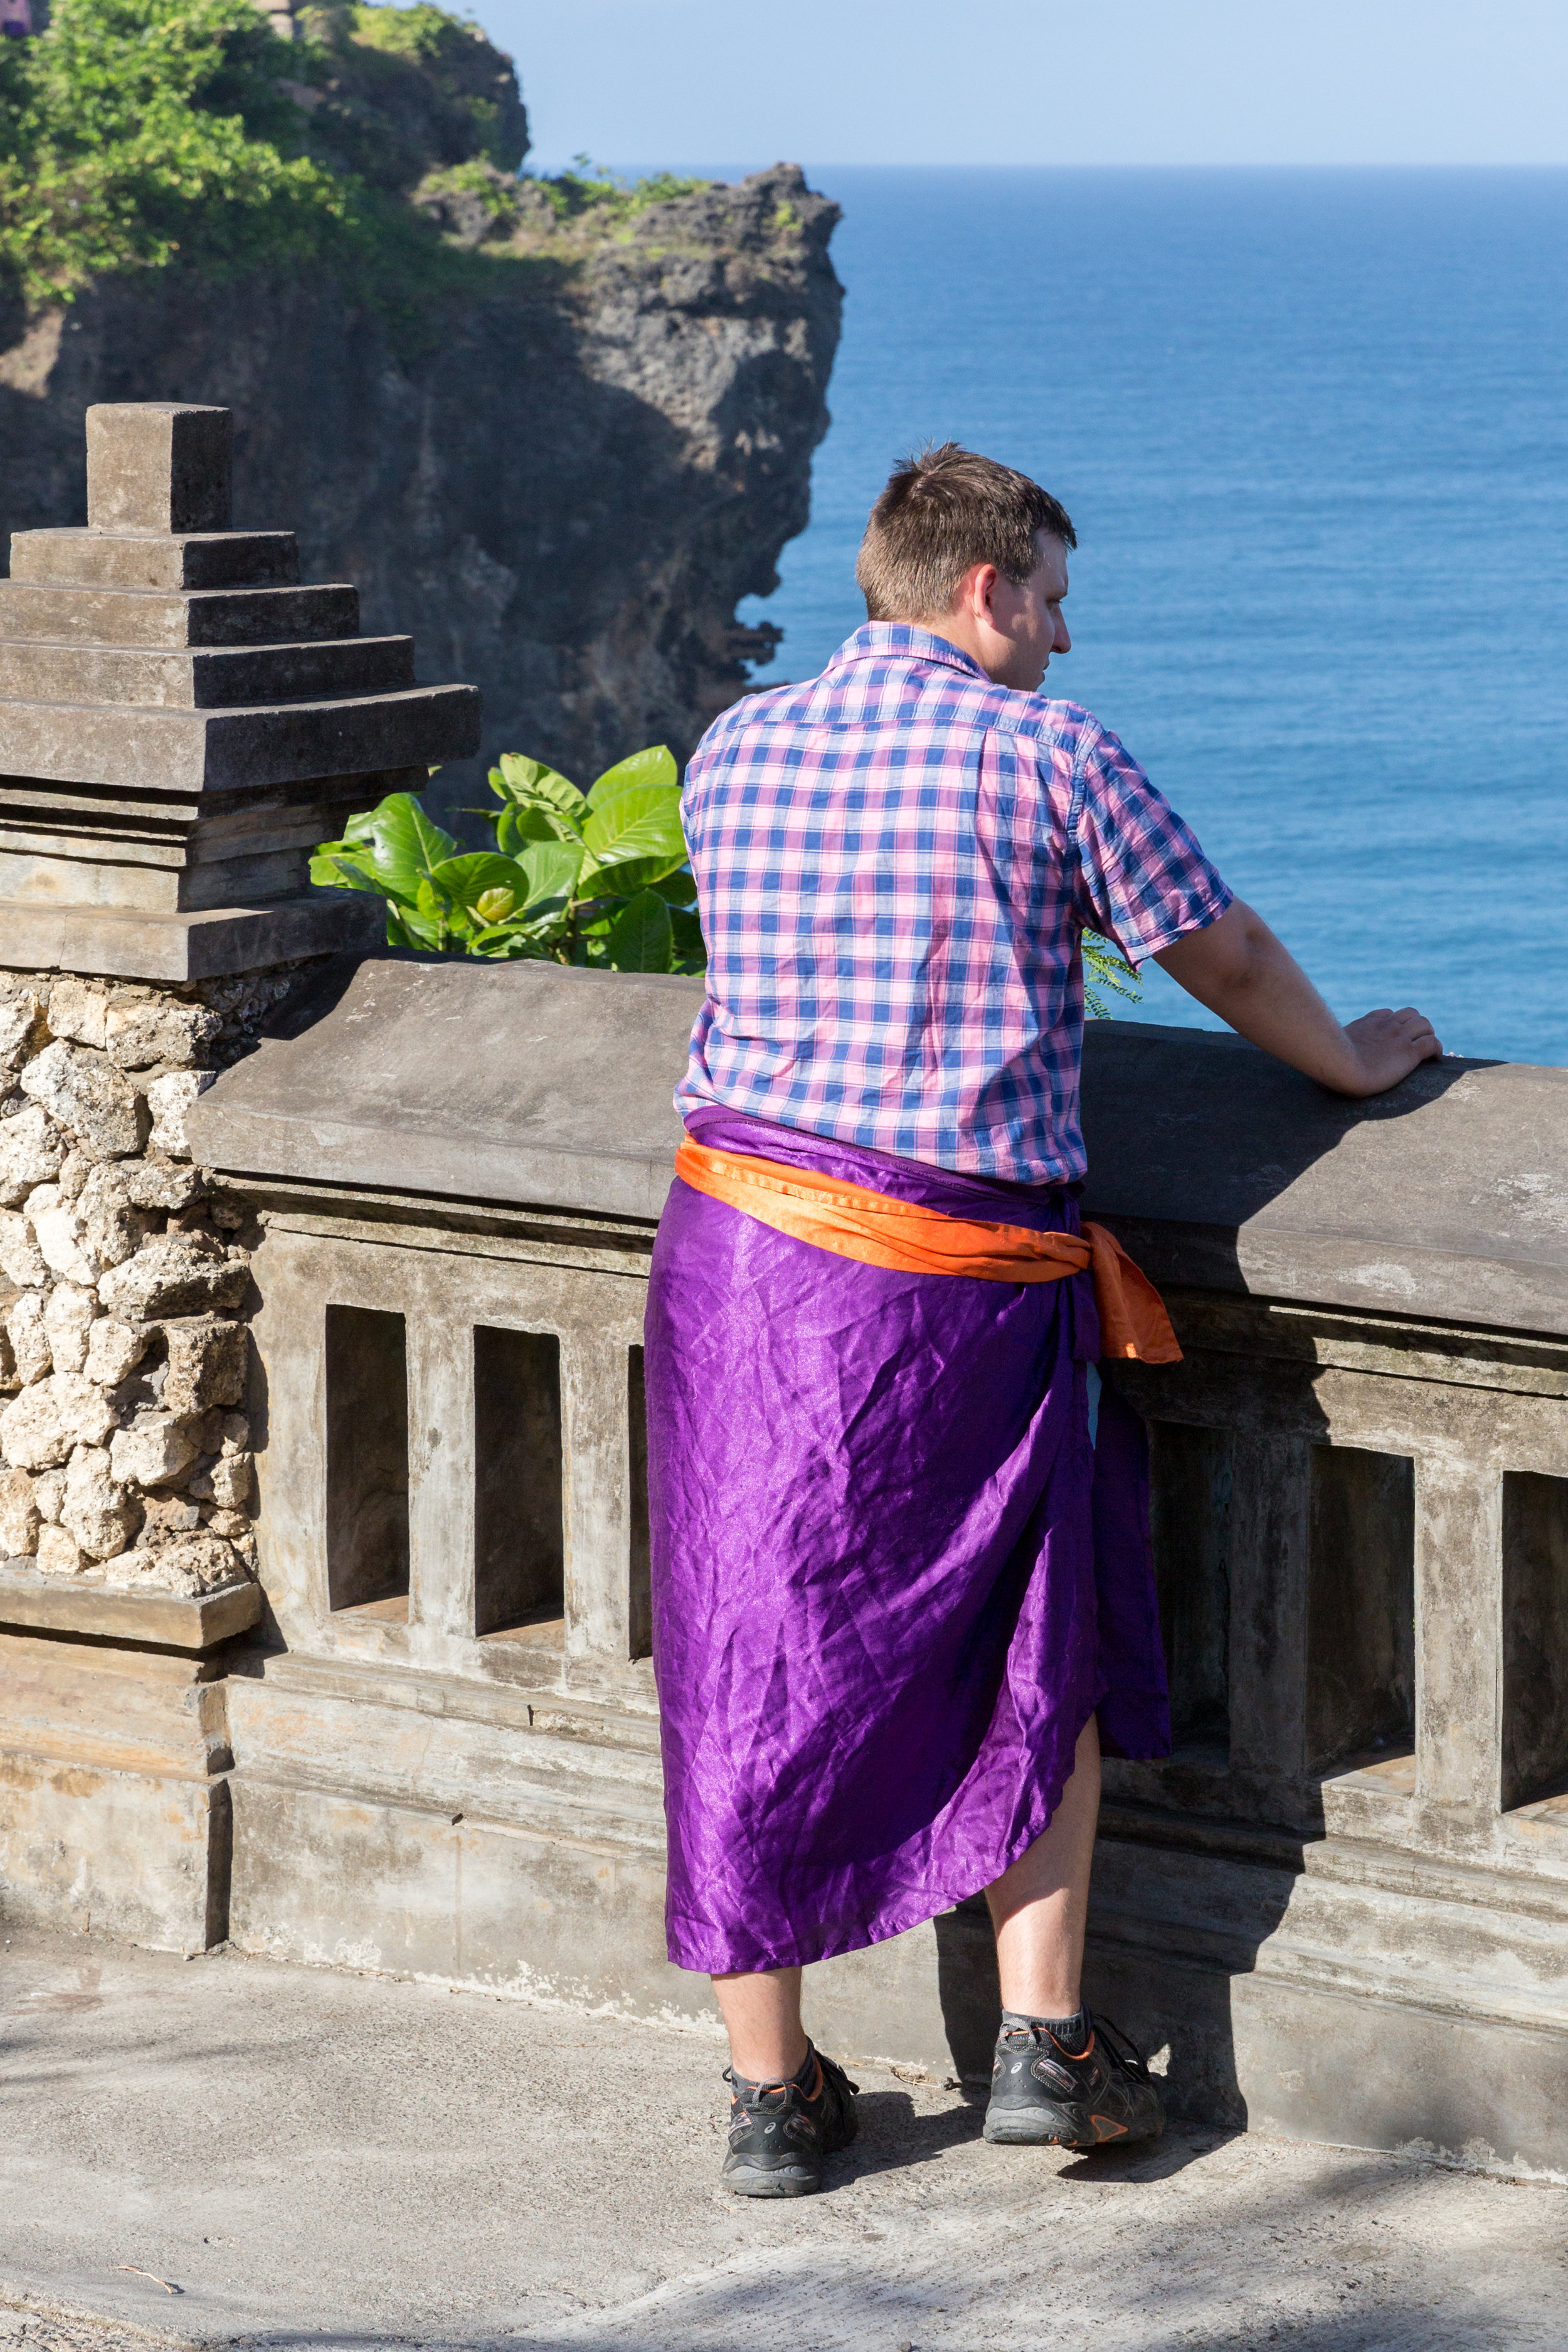 How to be pensive in a sarong